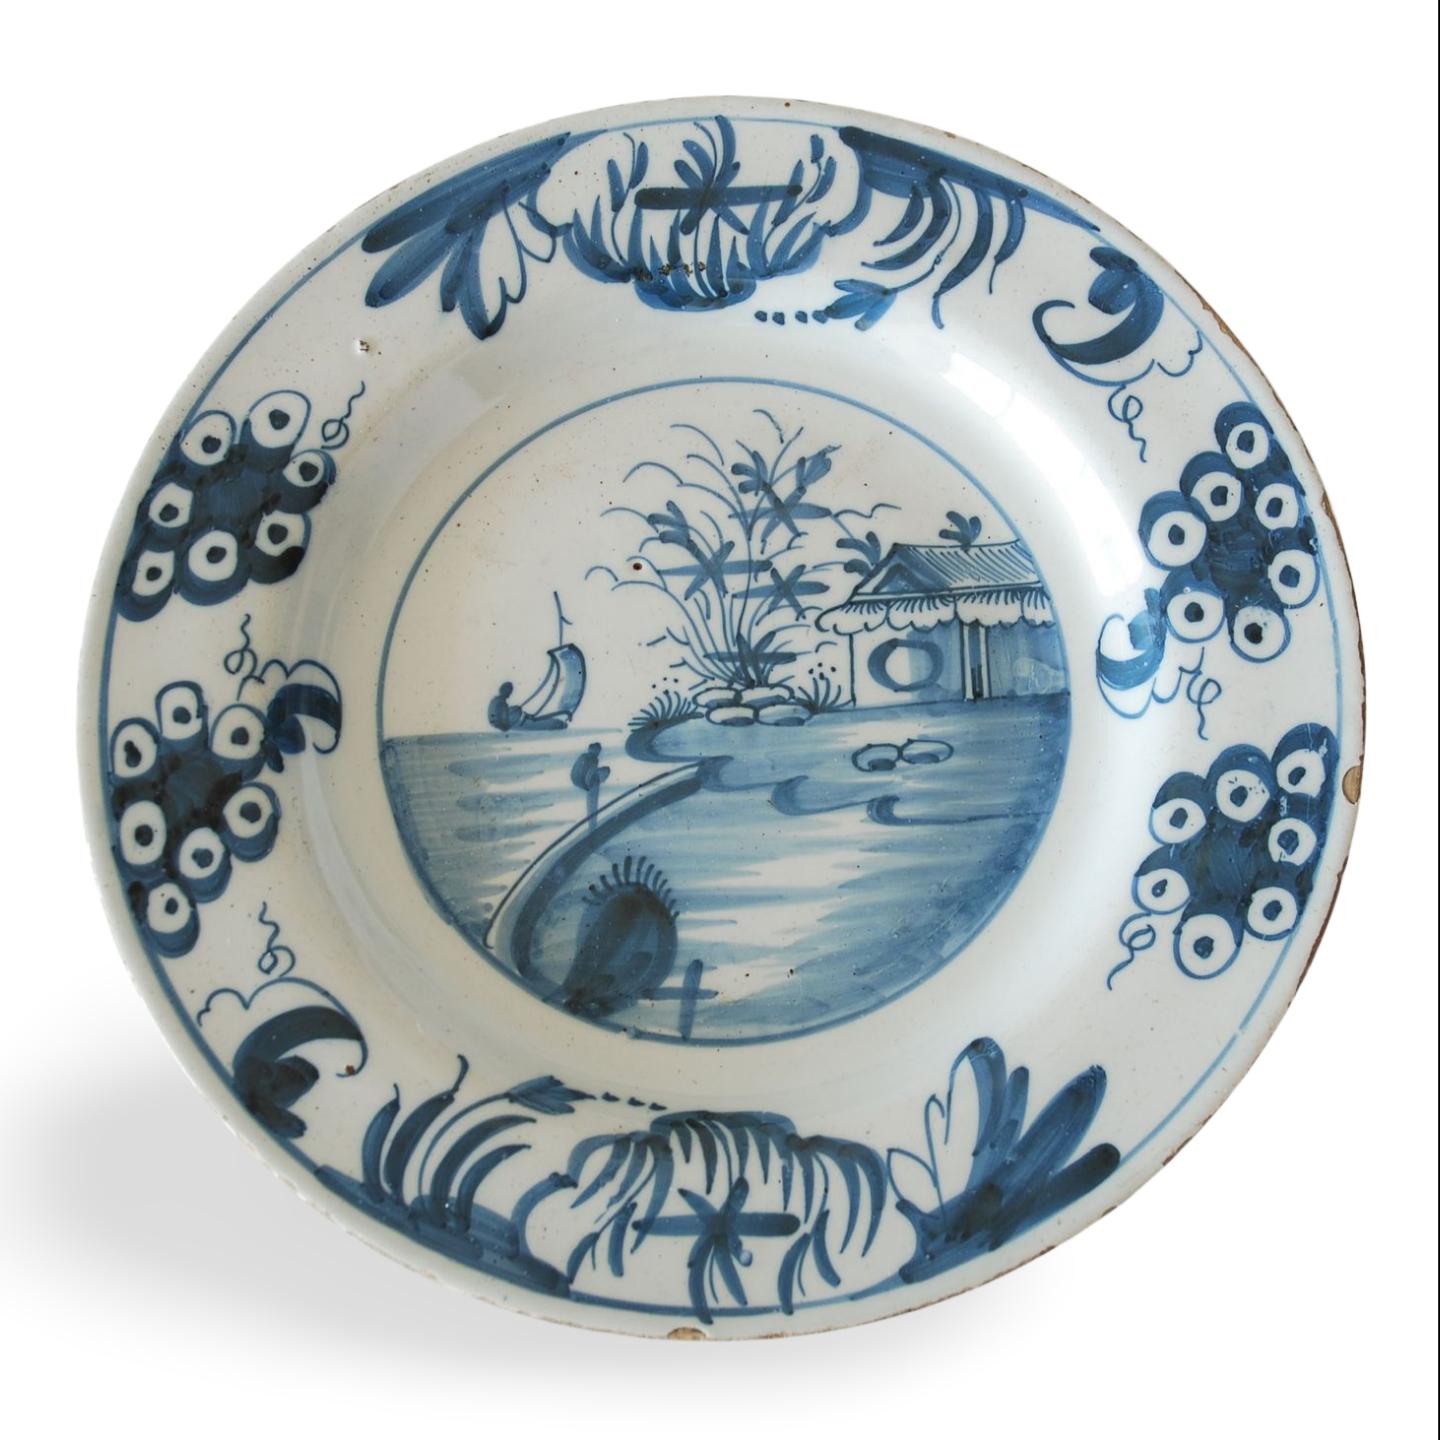 A dinner-plate, painted in the delft style, with a ship coming to land; bunches of grapes around the edge.

See Michael Archer, Delftwarem m233 no B258 for a similar example, which he places at Delftfield (Glasgow) on the basis of wasters